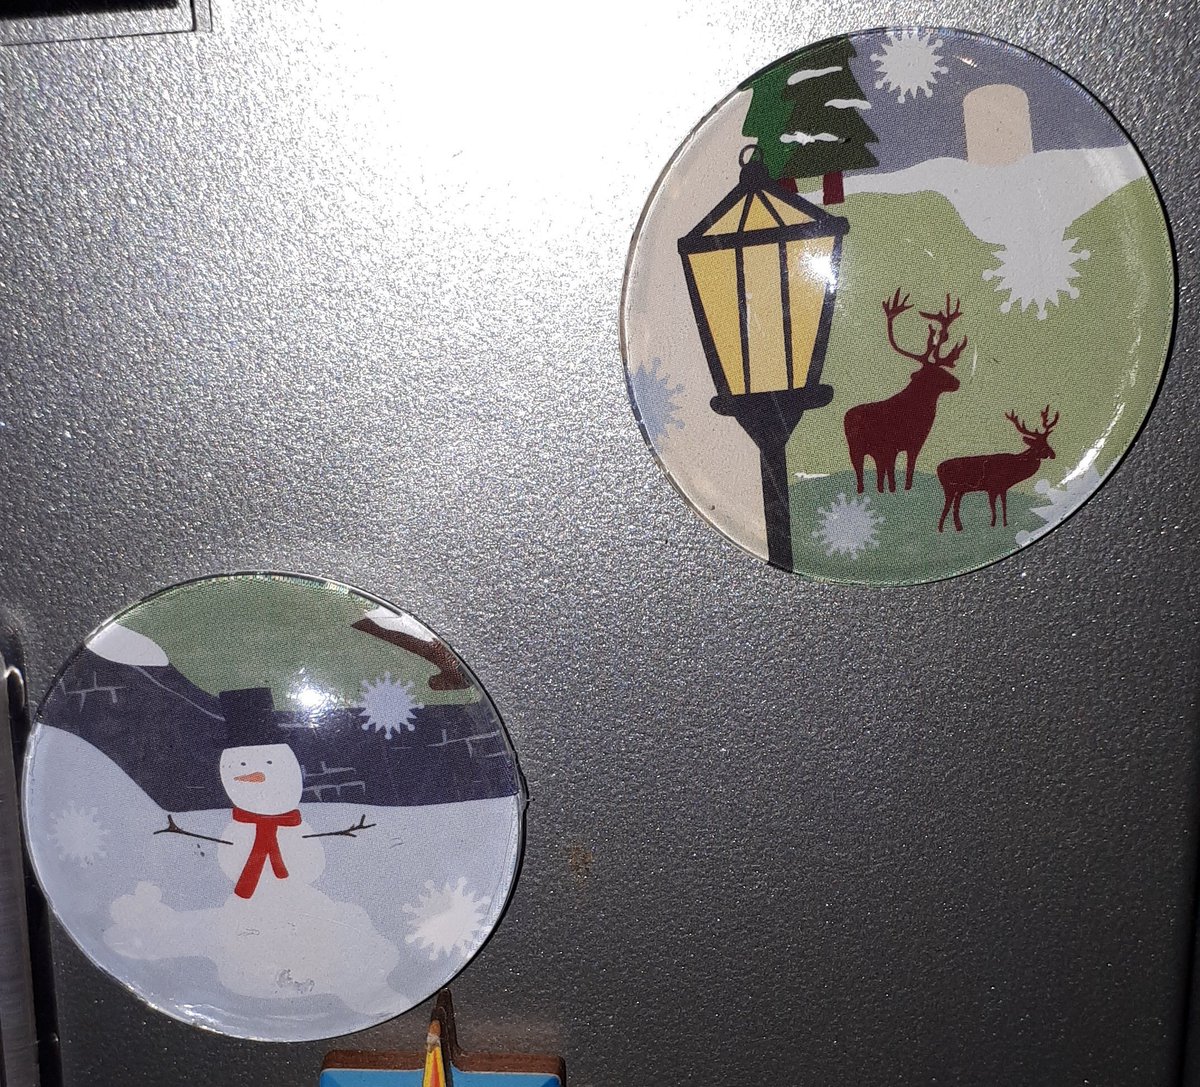 What to do with a #fairytaleofbrewyork label? Make large glass fridge magnets! I think I may love them too much 😍🎄🎁🎄😍 @brewyorkbeer @ubd_studio @breweryjeweller #seasonalgoodness #howlush #craftbeerlabels #craftbeercans #beerlovers #craftbeernewcastle #upcycled #repurposed